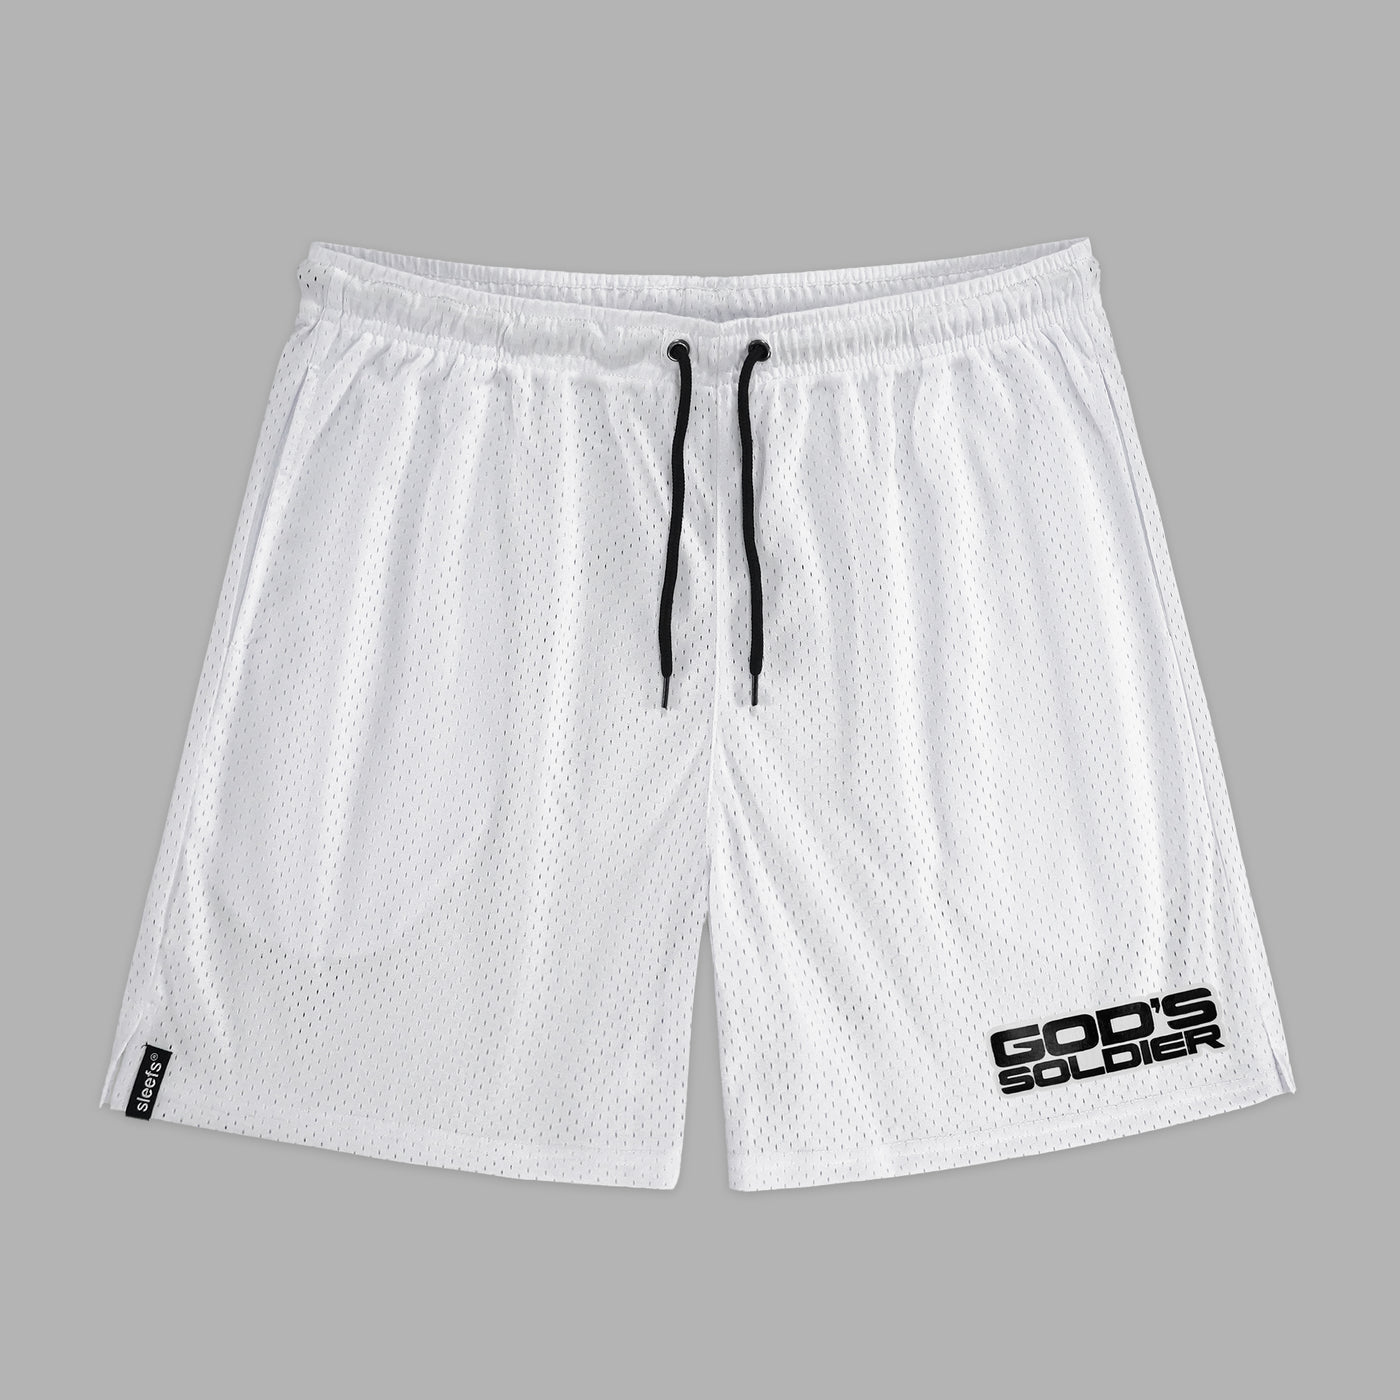 God's Soldier Patch Shorts - 7"